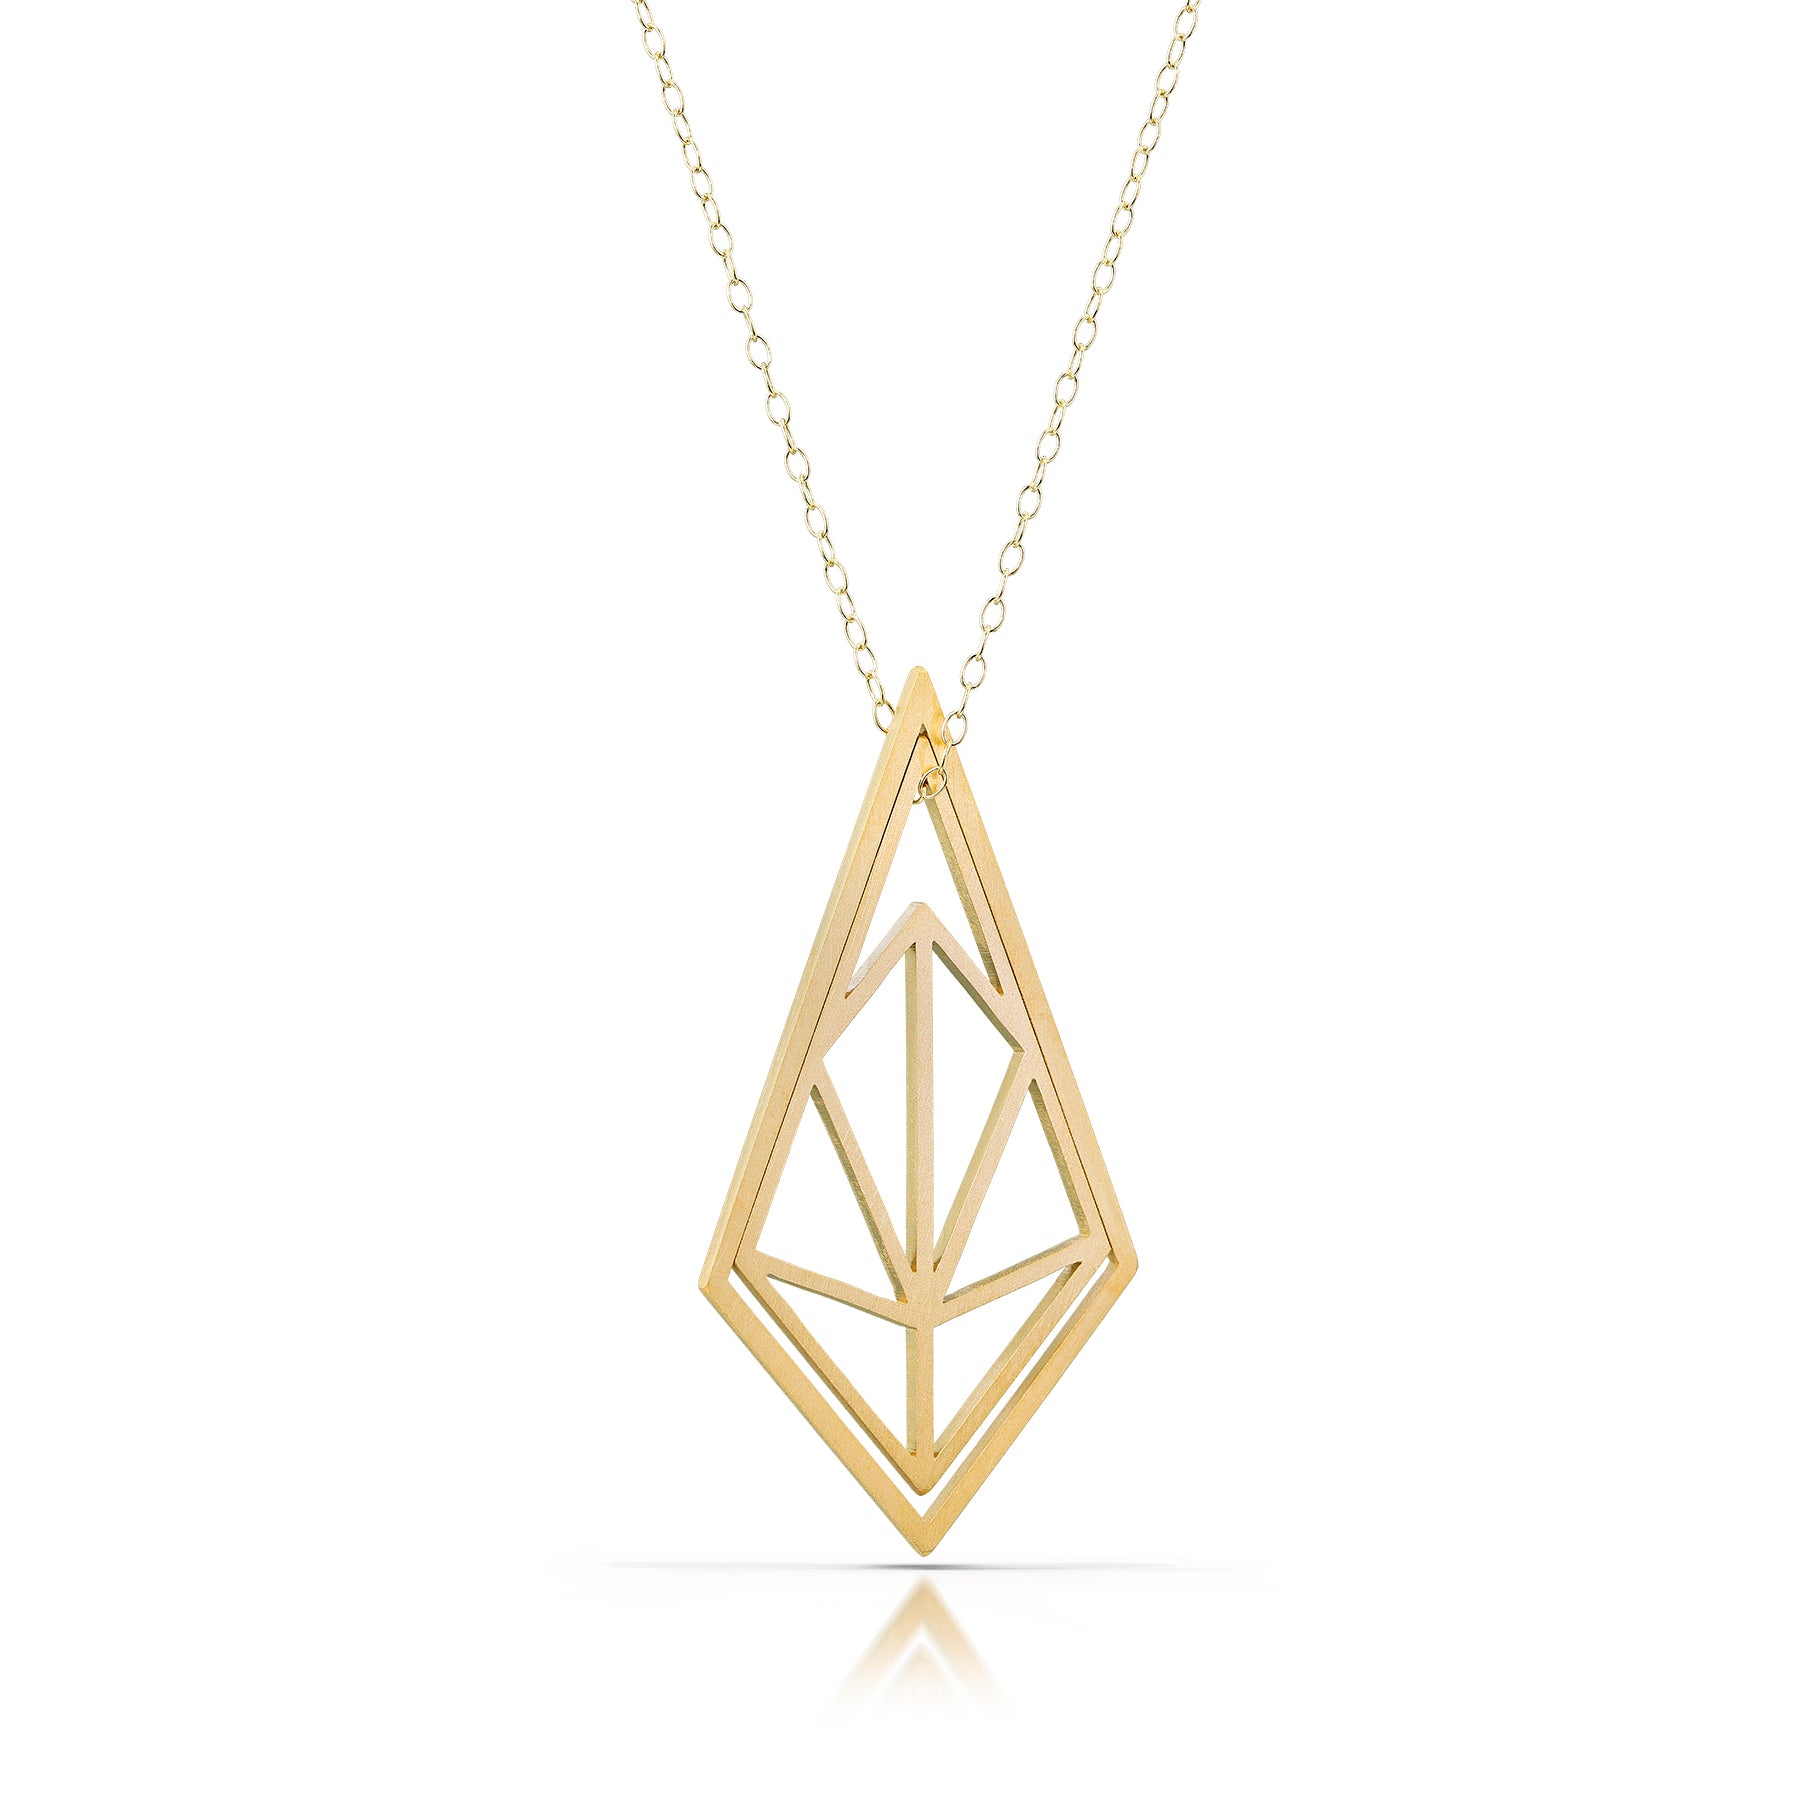 web necklace, 18k gold-plated